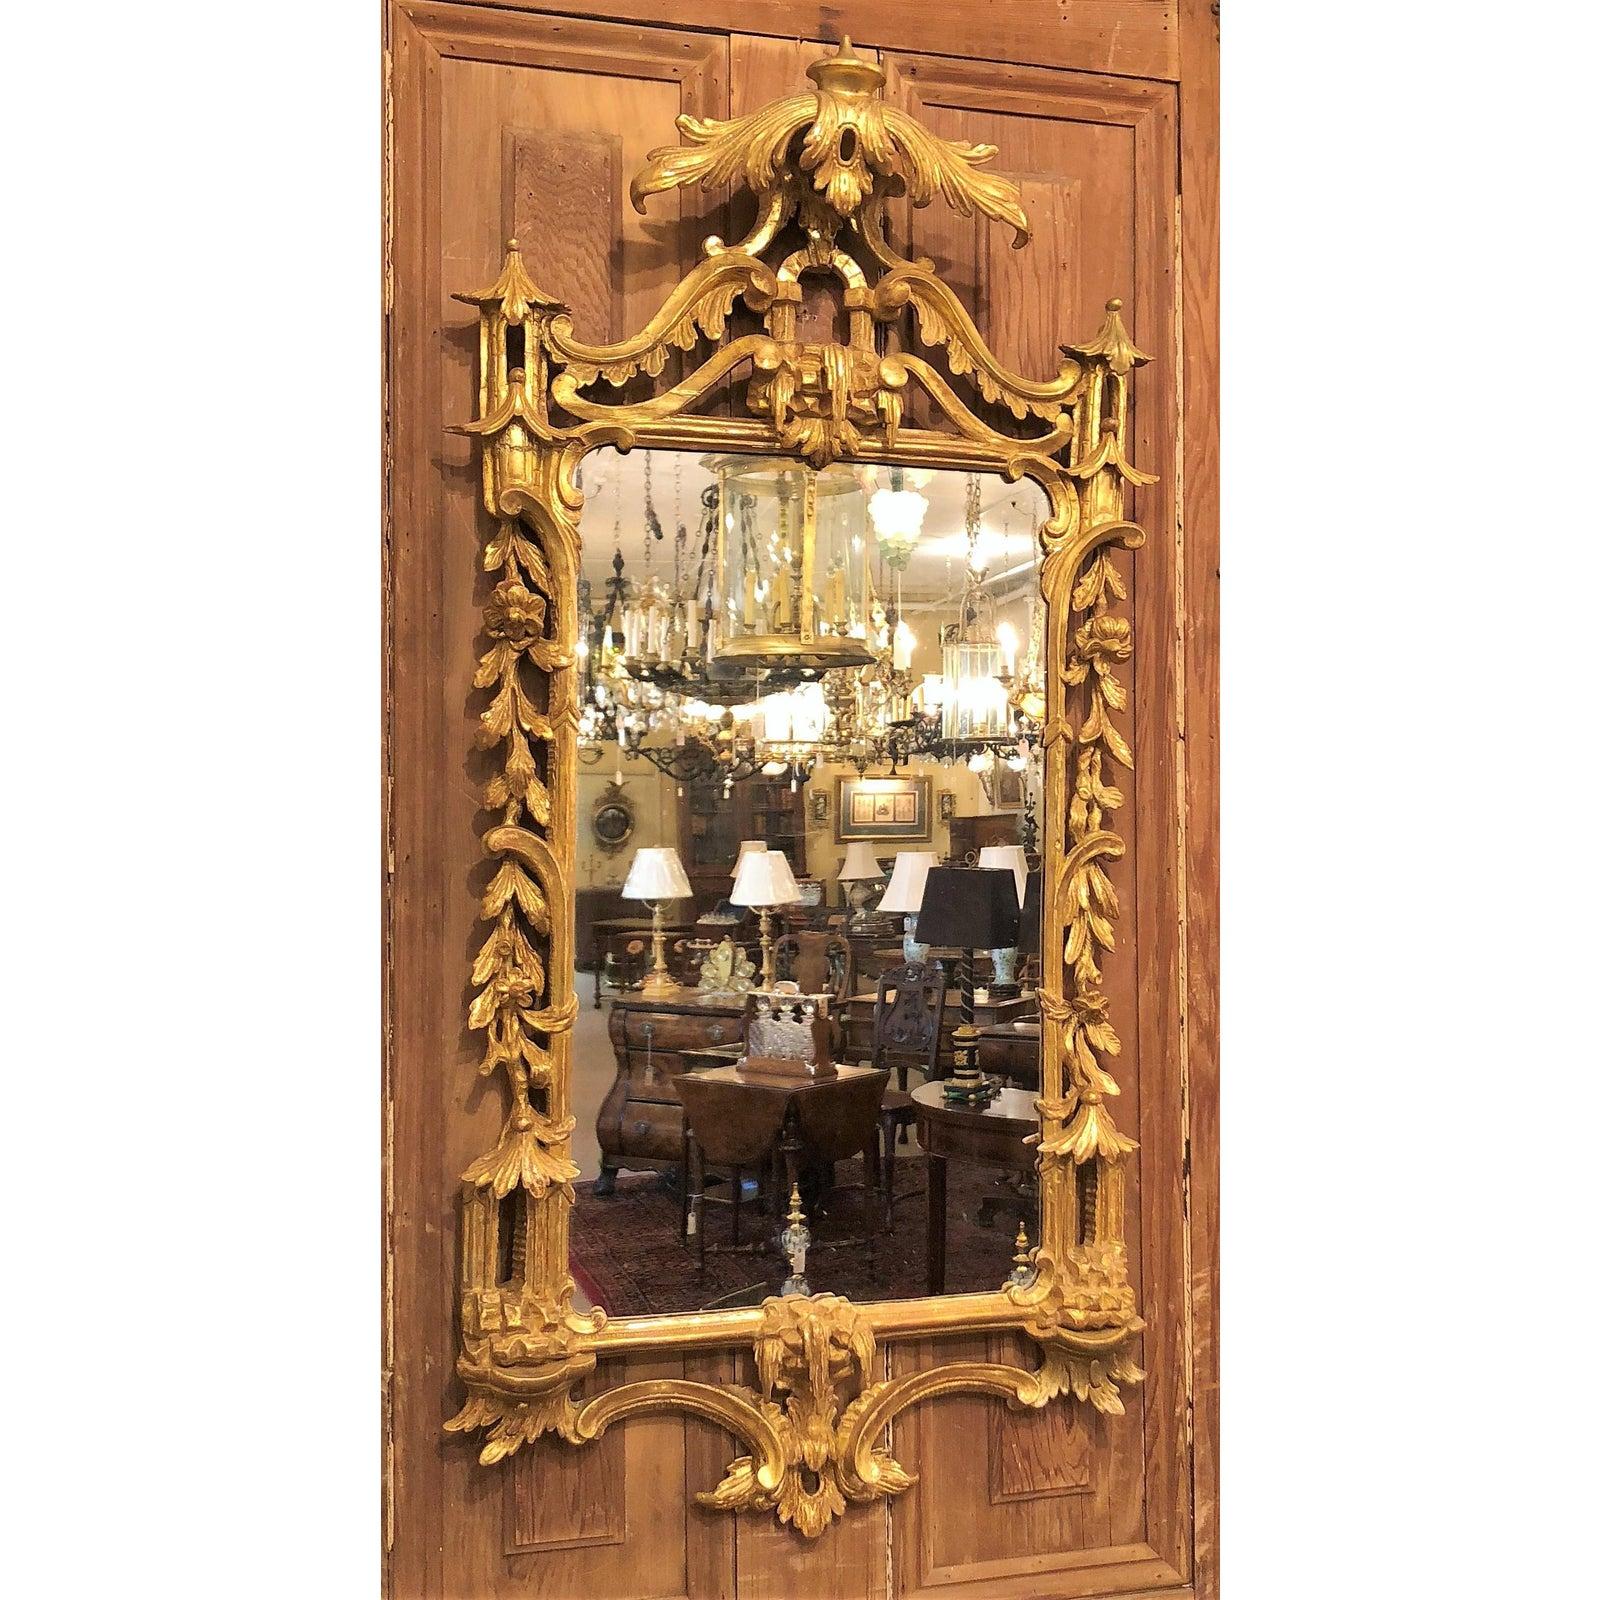 Antique chinoiserie style gilded carved wood mirror, circa 1920-1930.
  